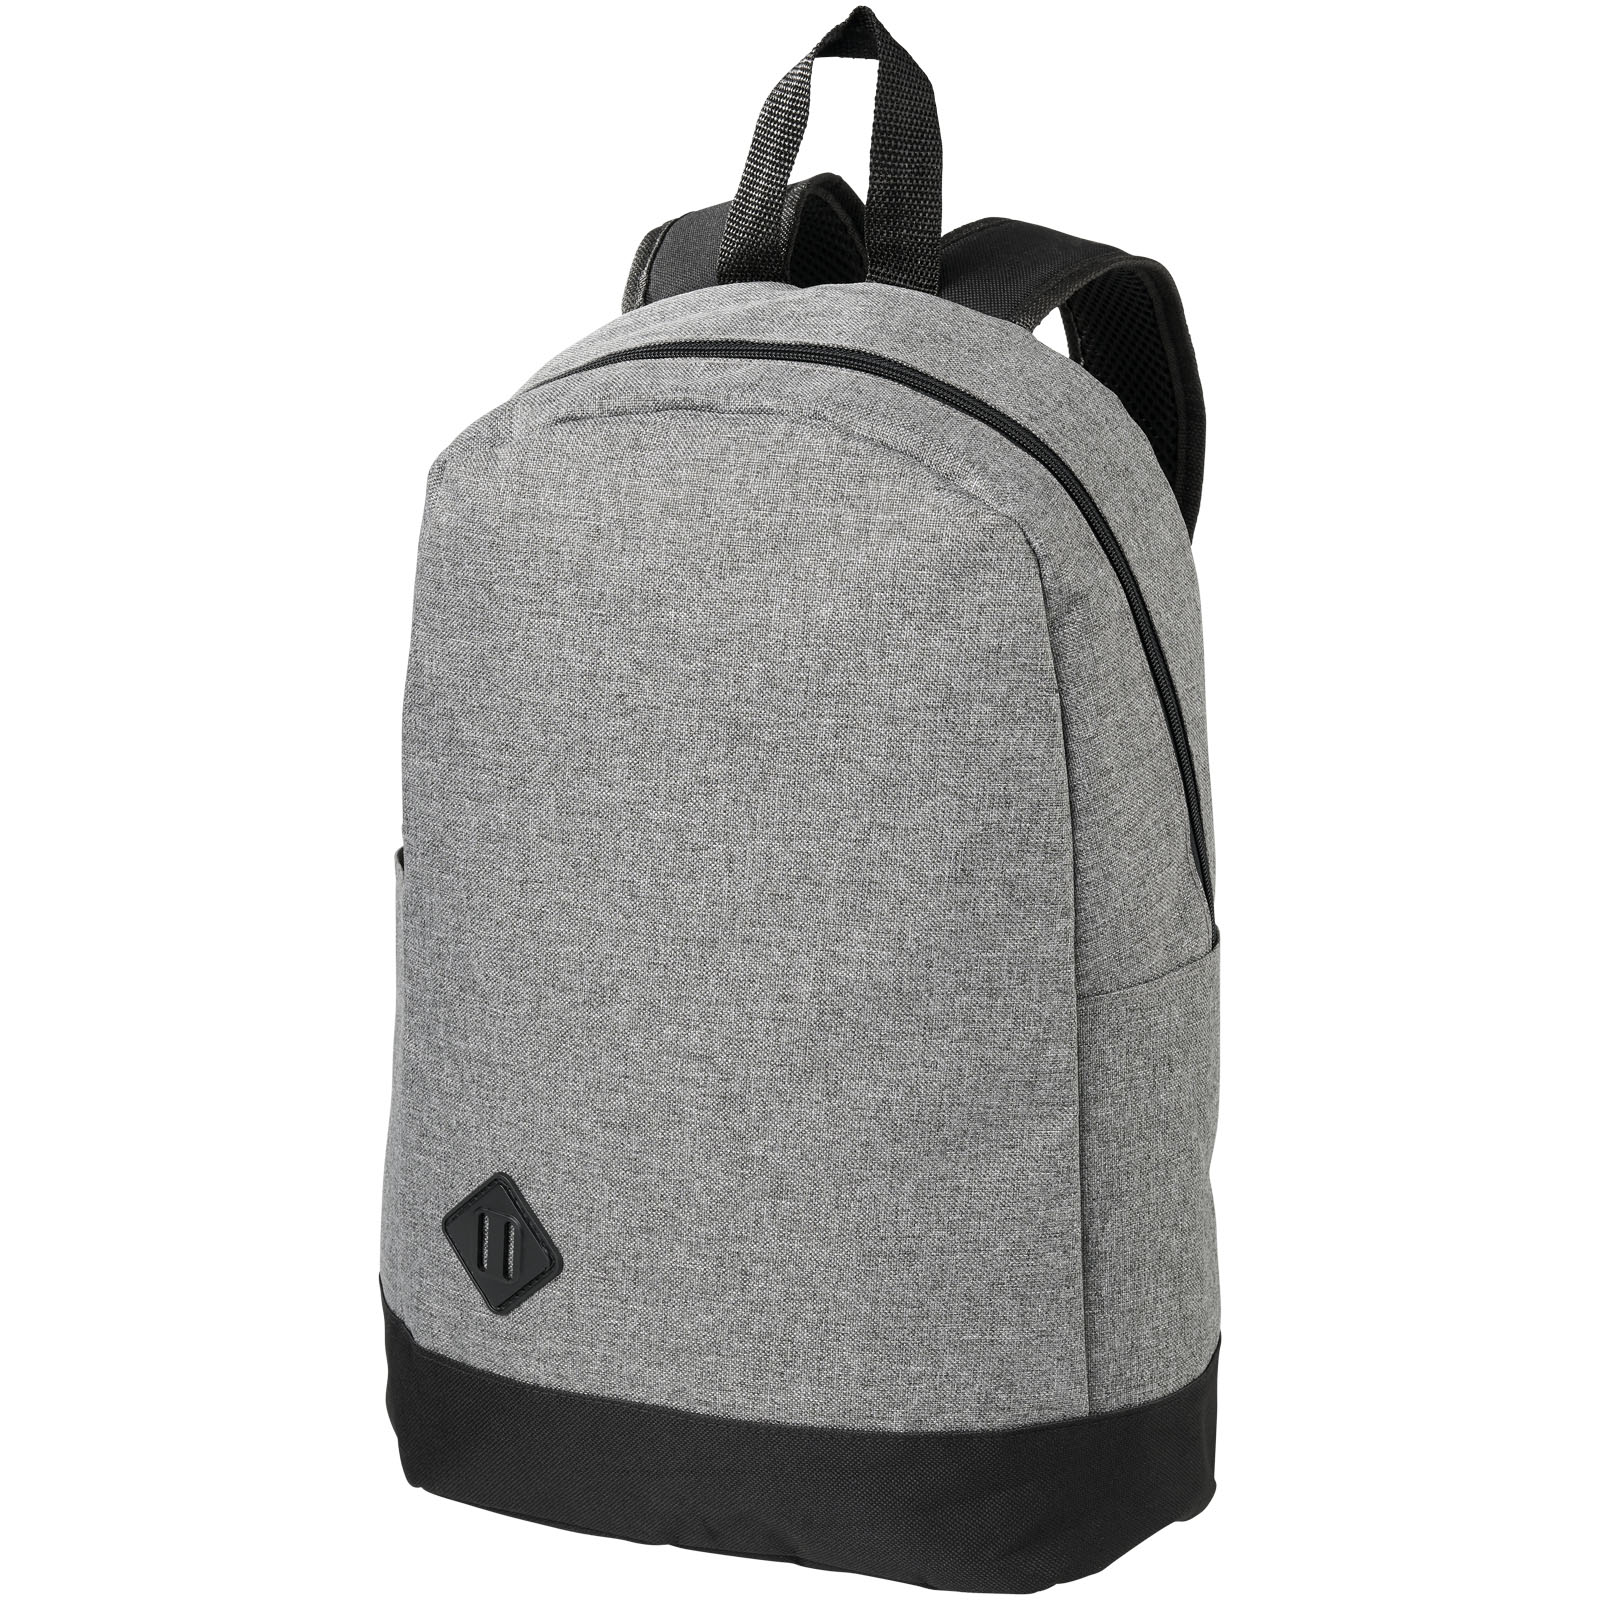 This is a fashionable laptop backpack from Painswick. It's designed with style in mind, while also providing the necessary functionality to safely store and transport your laptop. Additional features may include comfortable shoulder straps, multiple pockets for storage, and durable materials for longevity. - Castleton